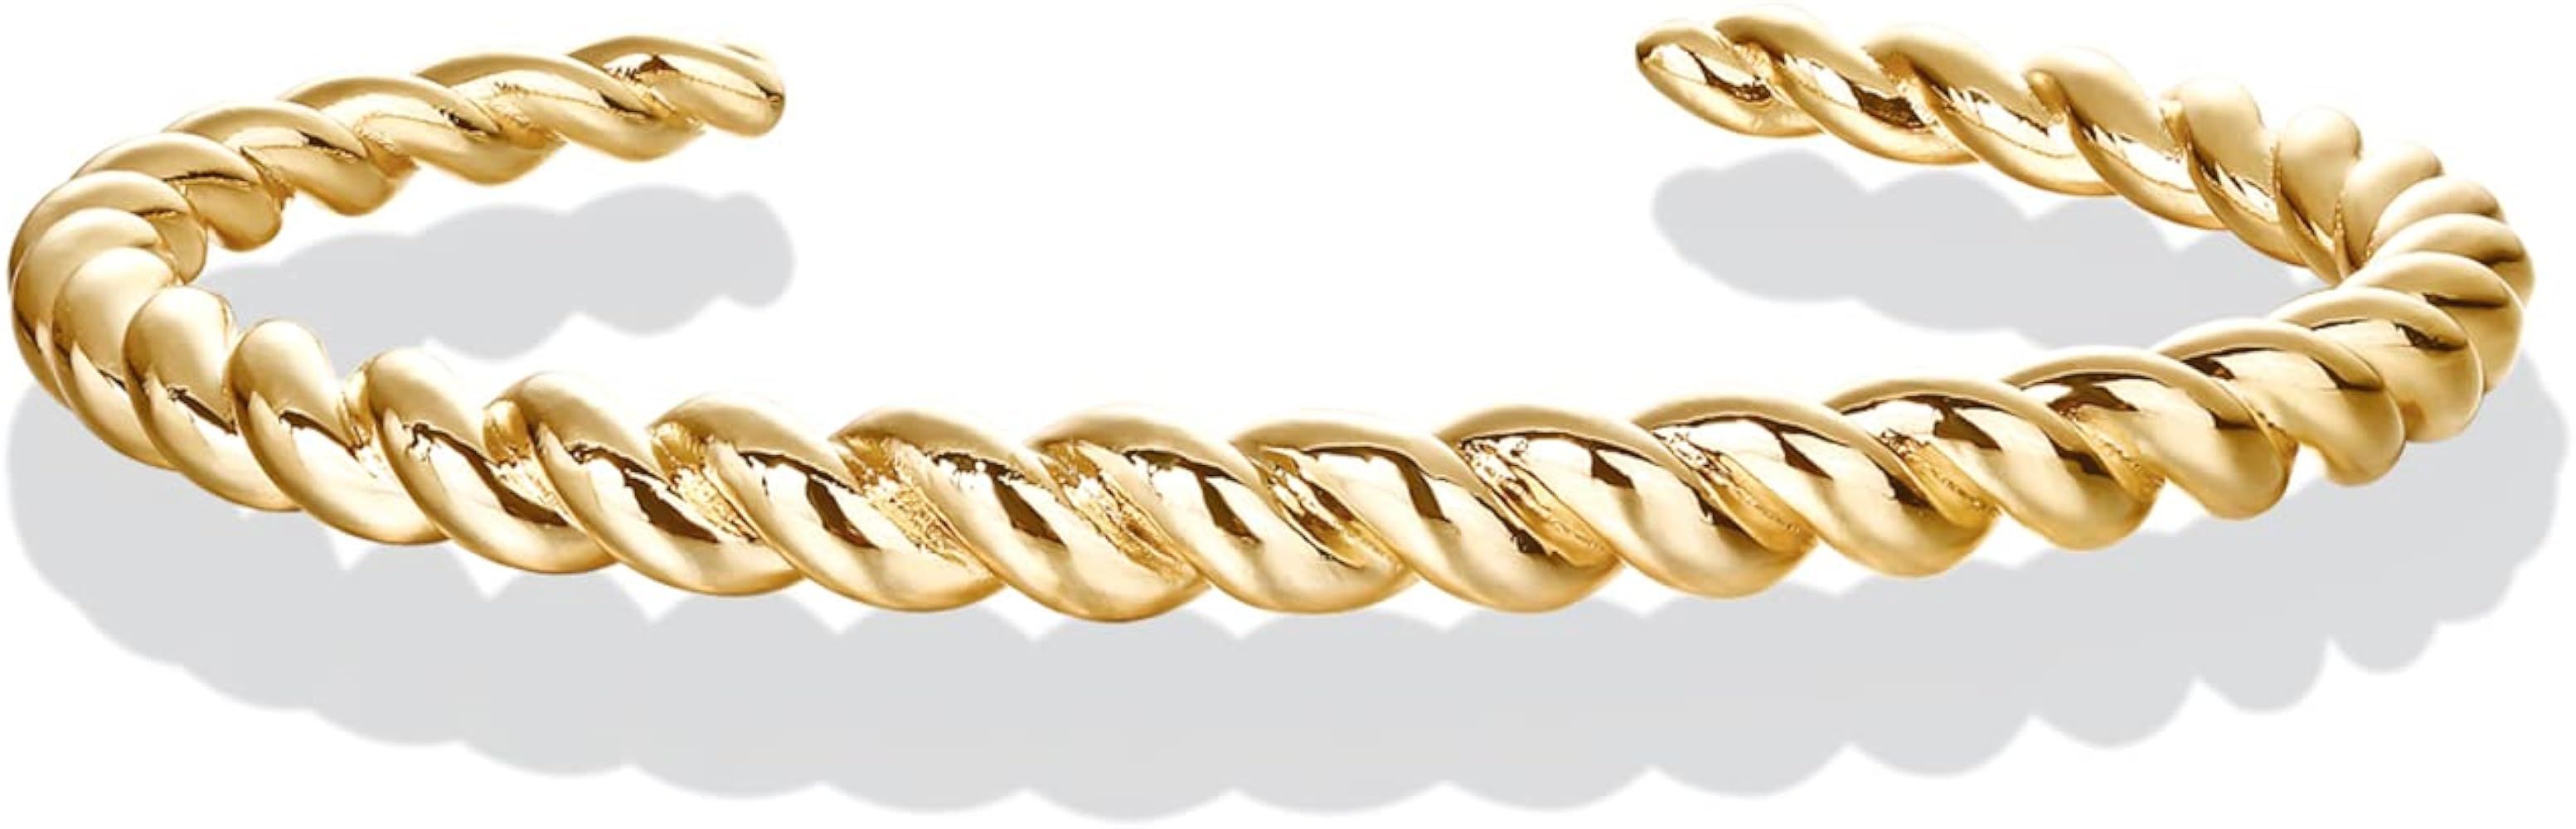 Gold Plated Twisted Chunky Bangle Bracelet | 14K Gold Plated | Lightweight Everyday Jewelry | Amazon (US)